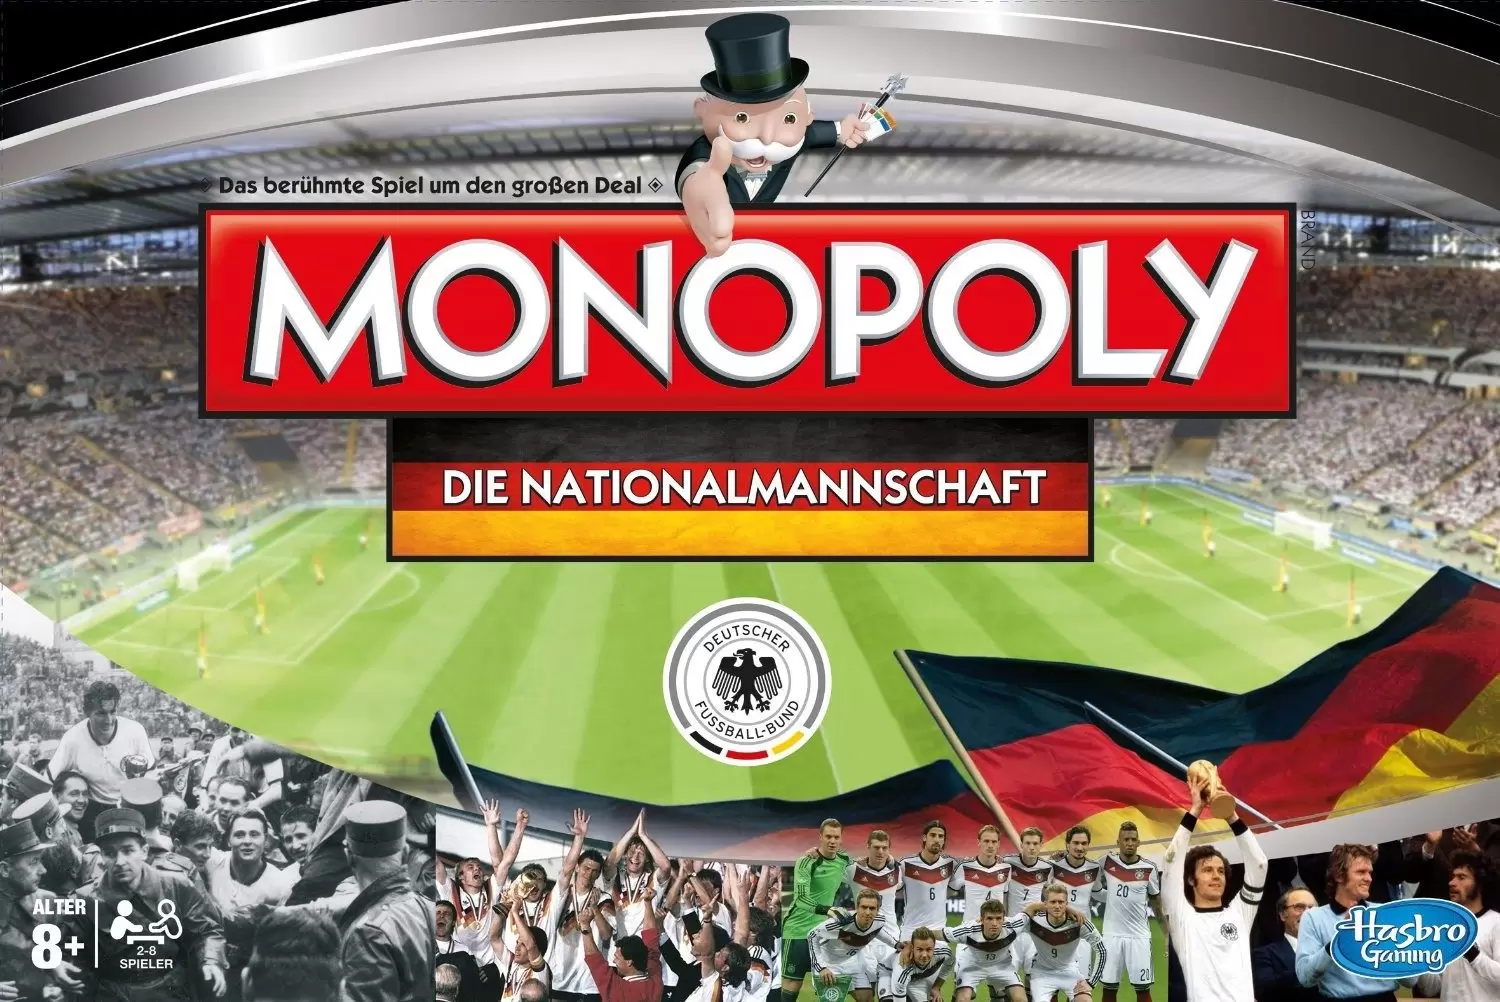 Monopoly Sports - Monopoly Die Nationalmannschaft